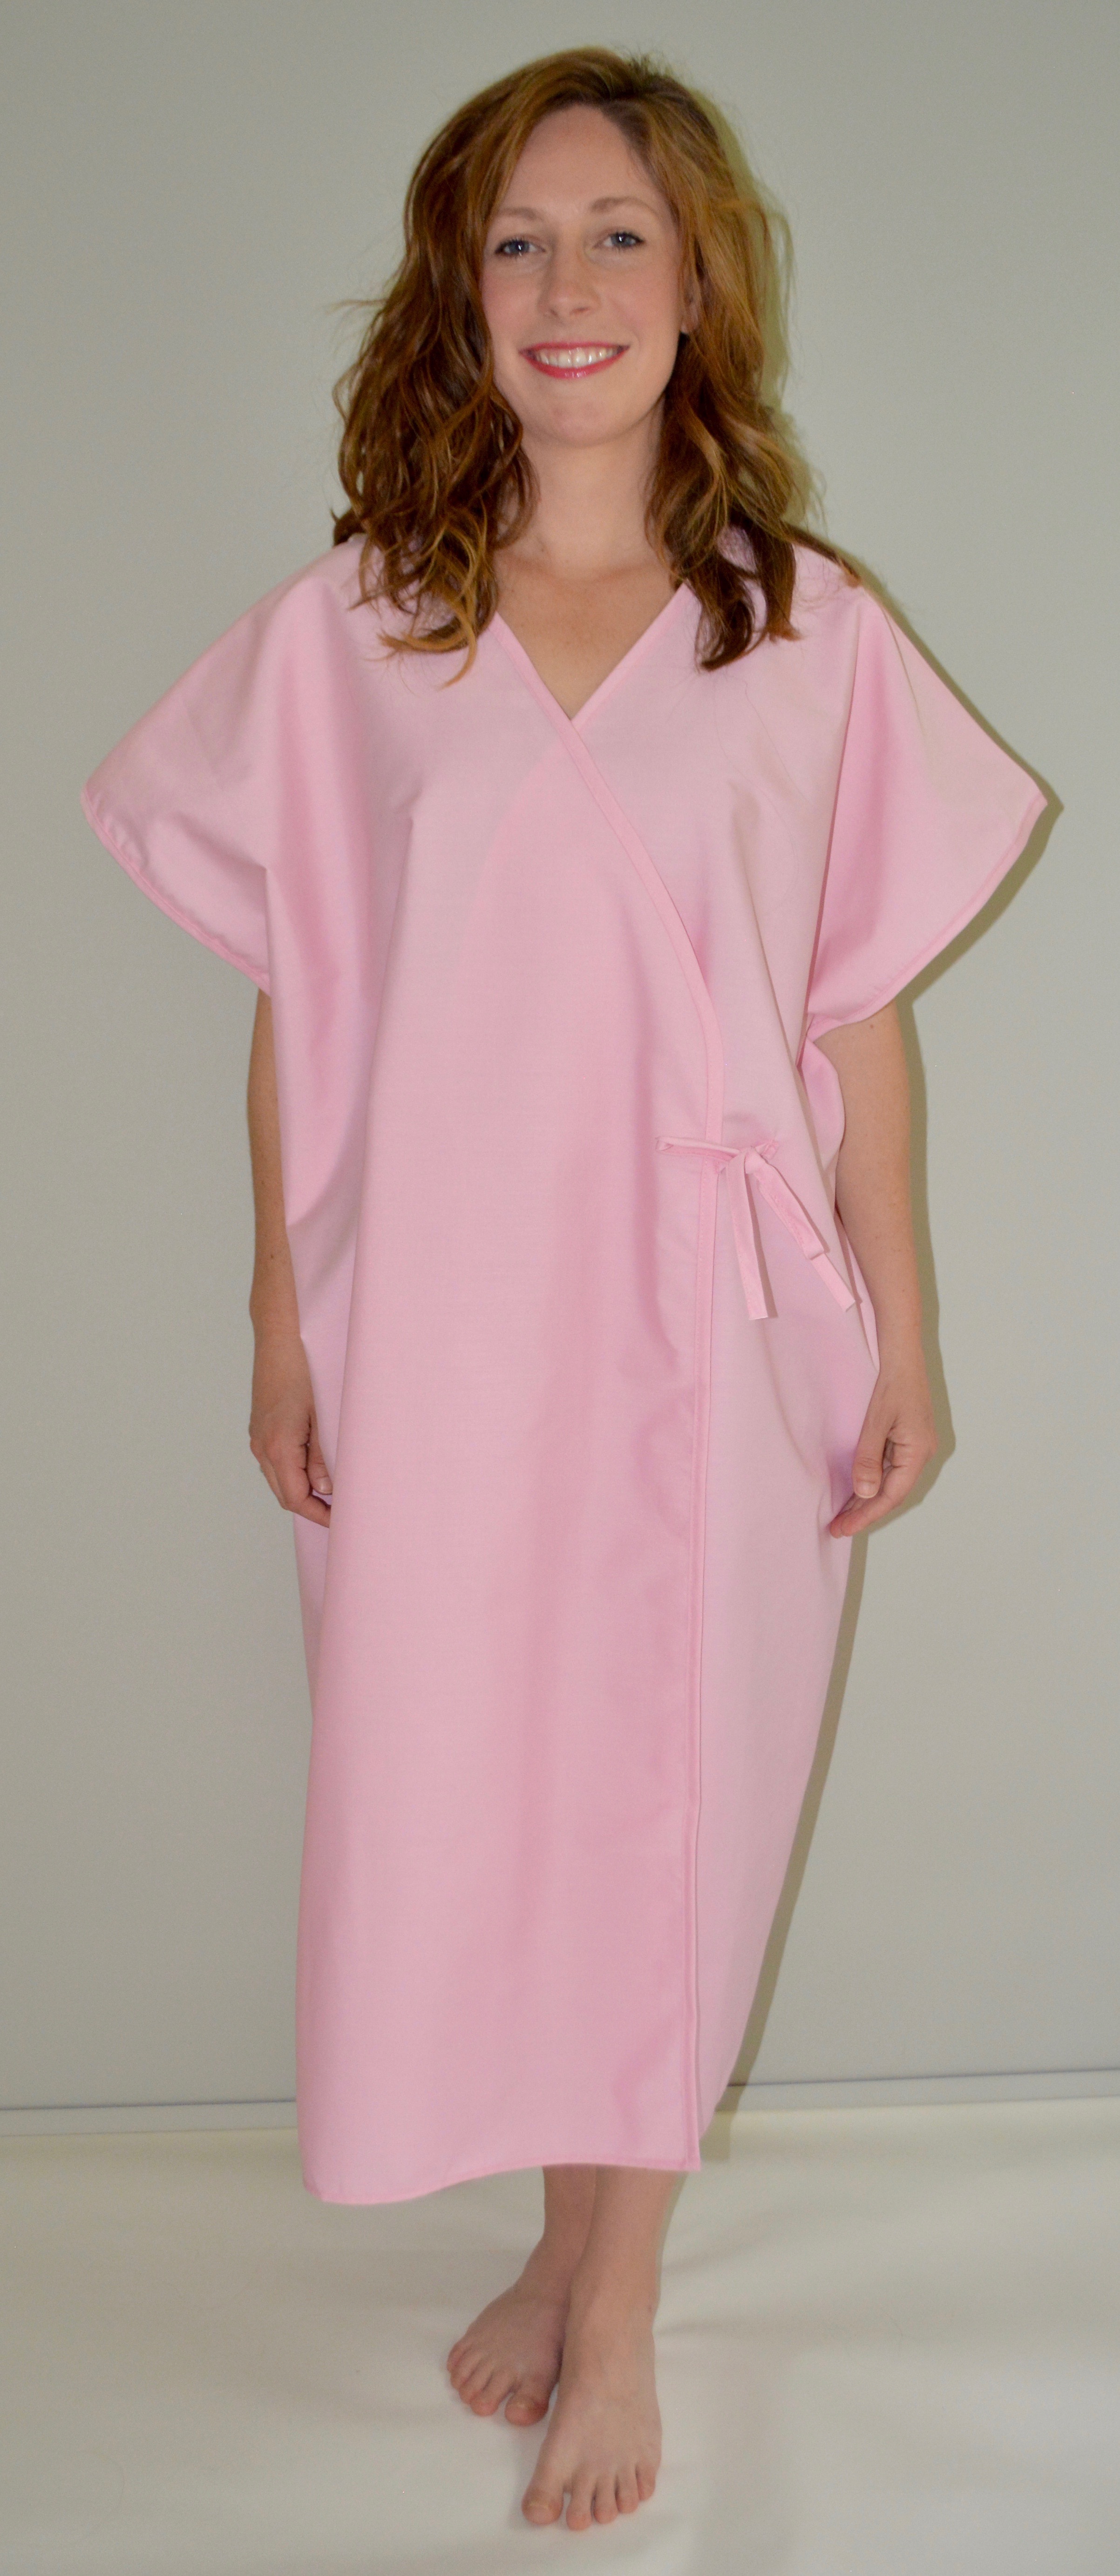 Mammography Gown